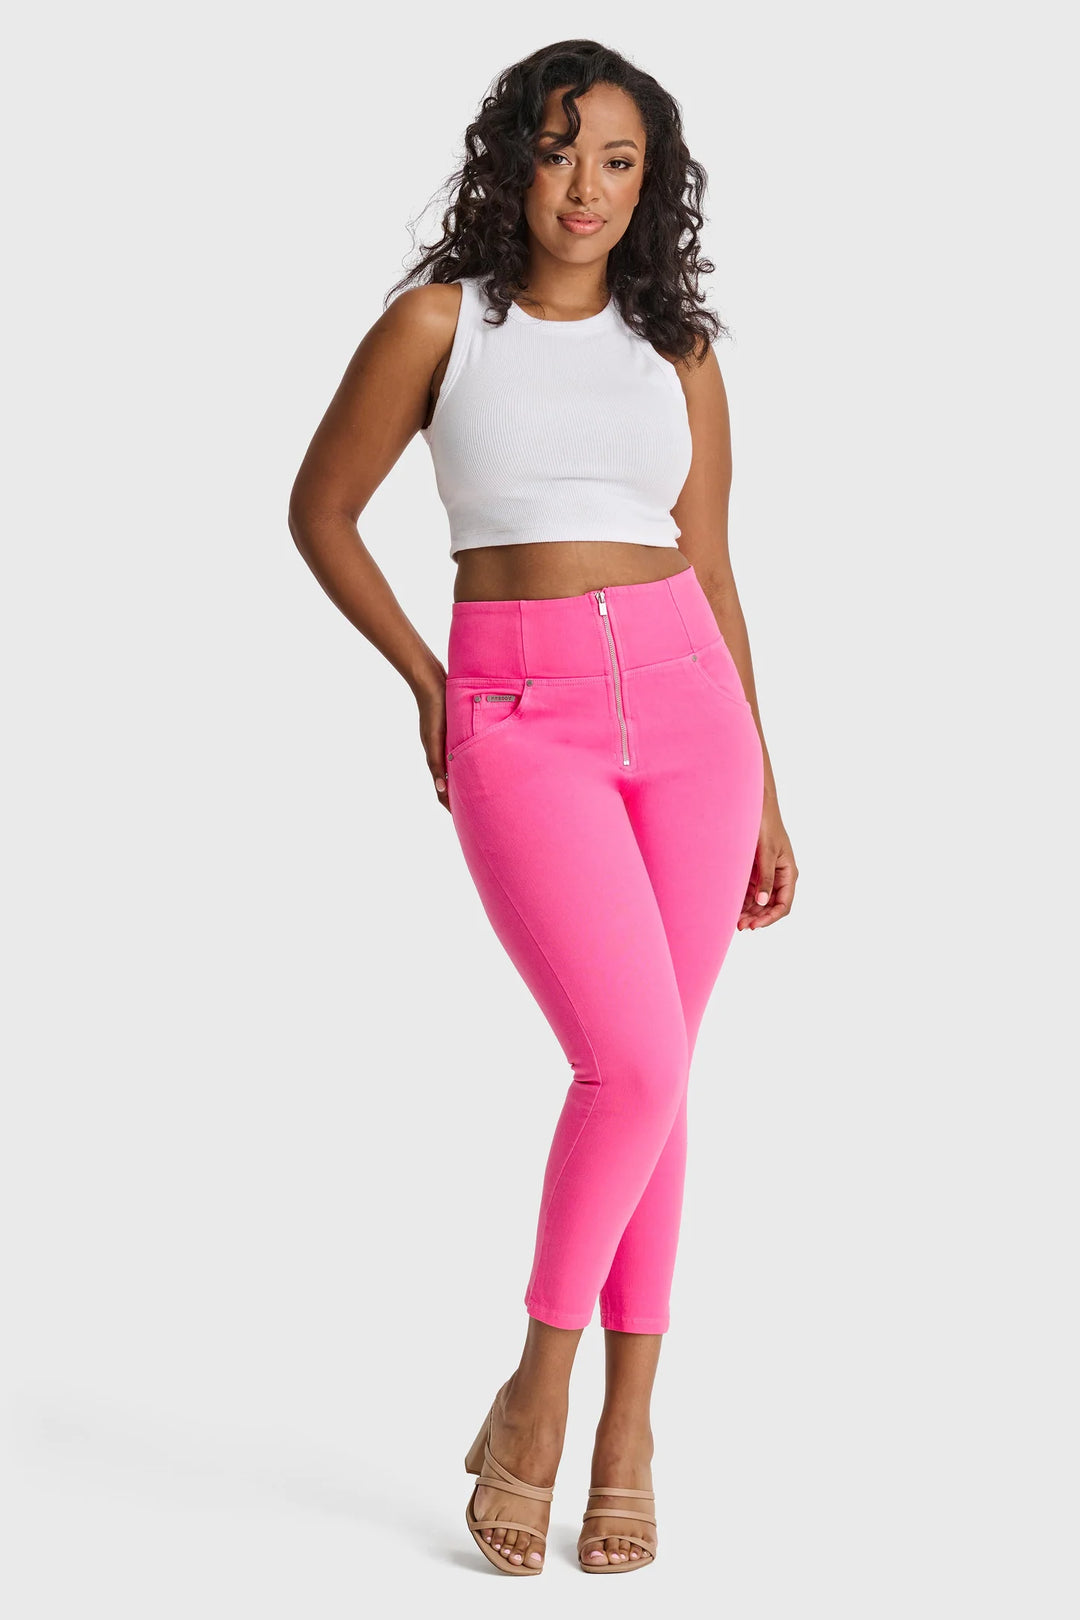 Freddy Pants Banner - WR.UP® Snug Curvy Jeans - Talle alto - Largo 7/8 - Rosa caramelo